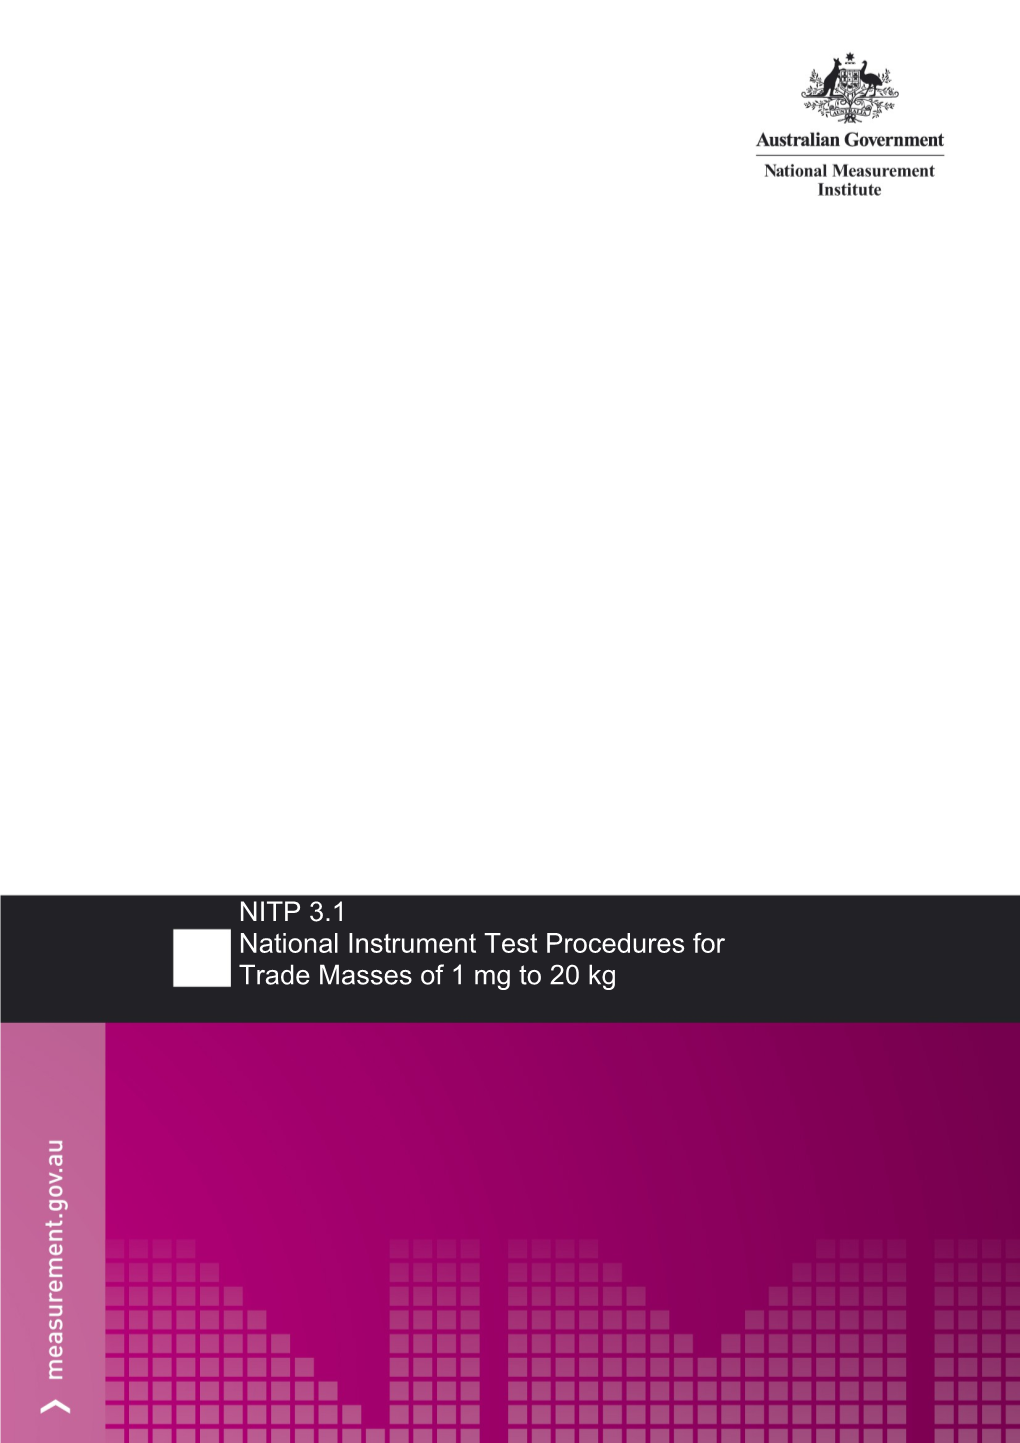 NITP 3.1 National Instrument Test Procedures for Trade Masses of 1 Mg to 20 Kg